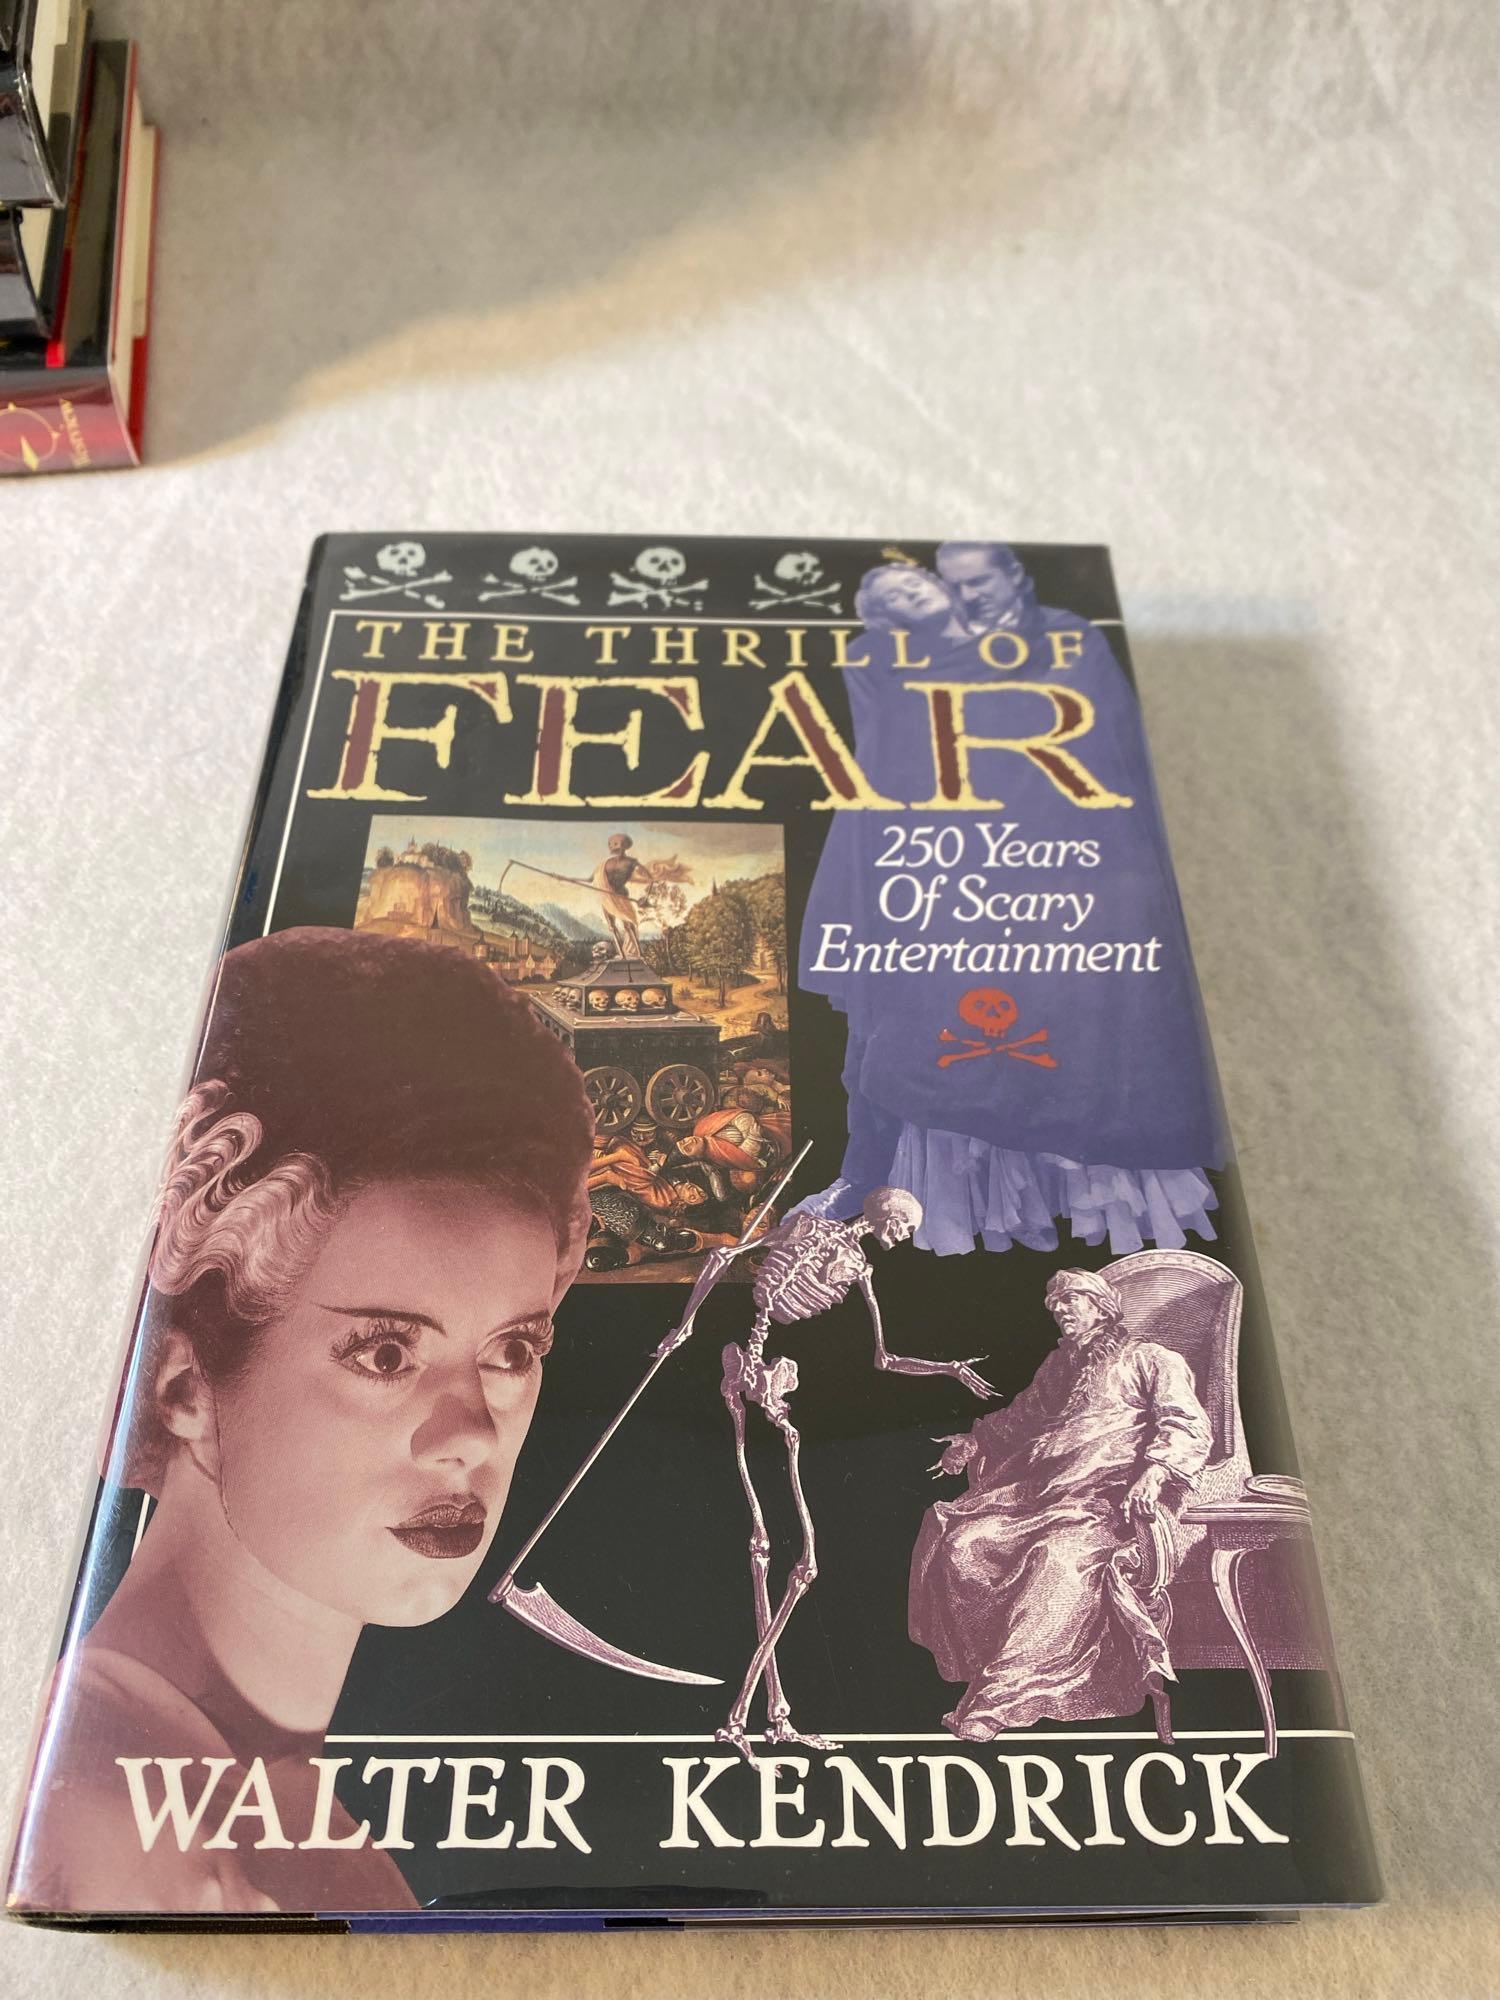 Seven Assorted Horror Reference Books